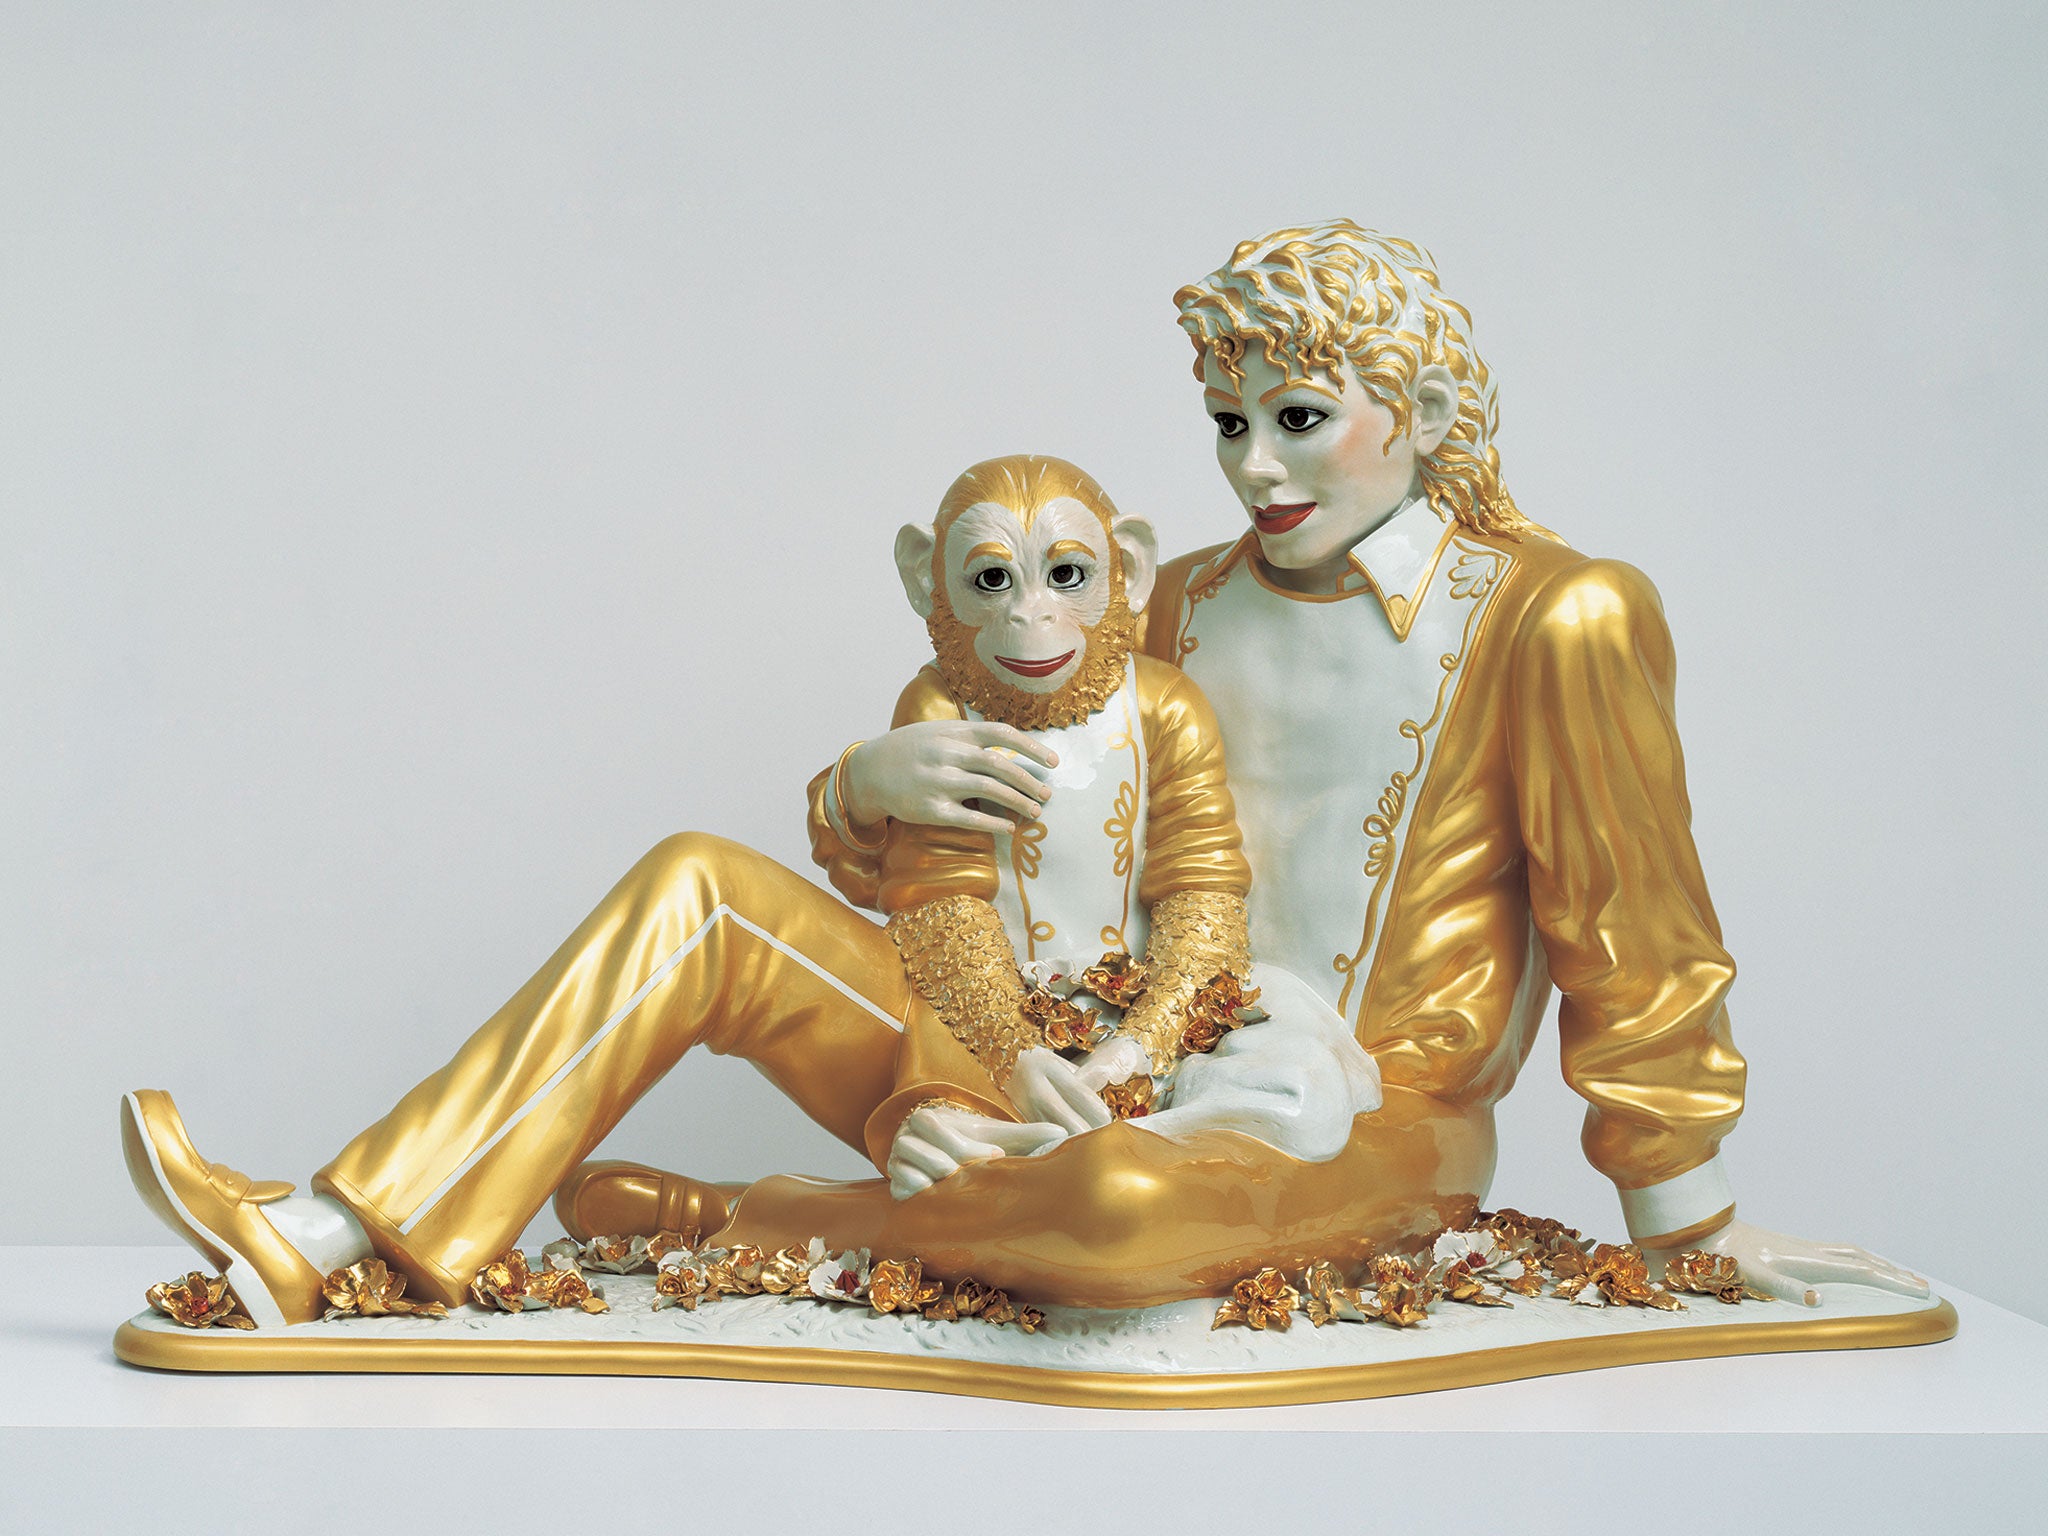 ‘Michael Jackson and Bubbles’ by Jeff Koons (1988)